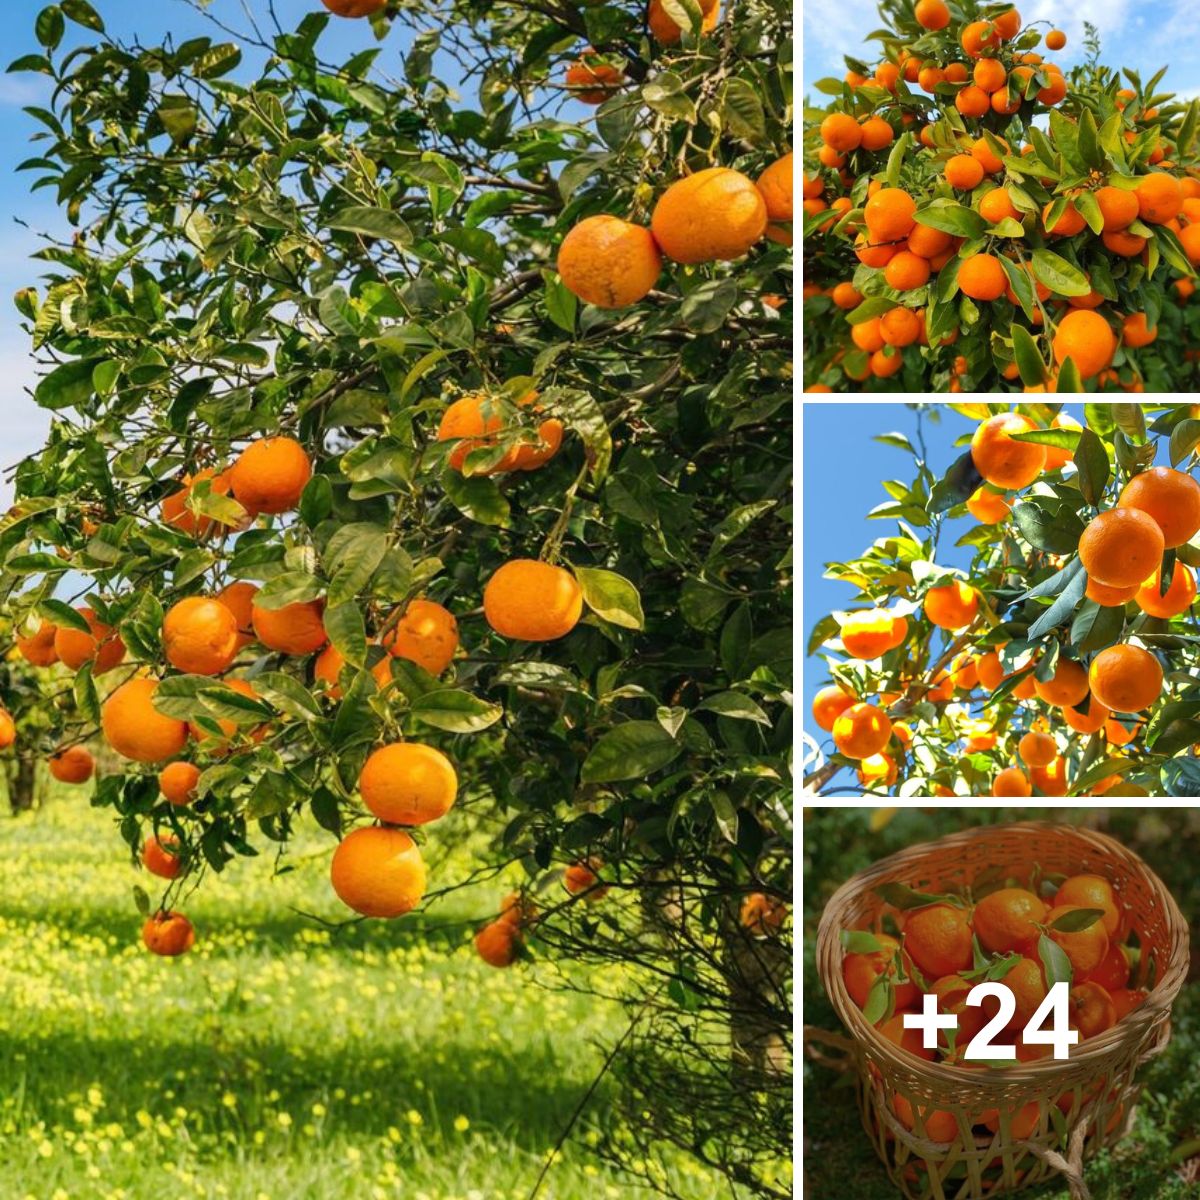 Kumquat Tree: Small-fruited trees that add extra flavor to your garden and kitchen.